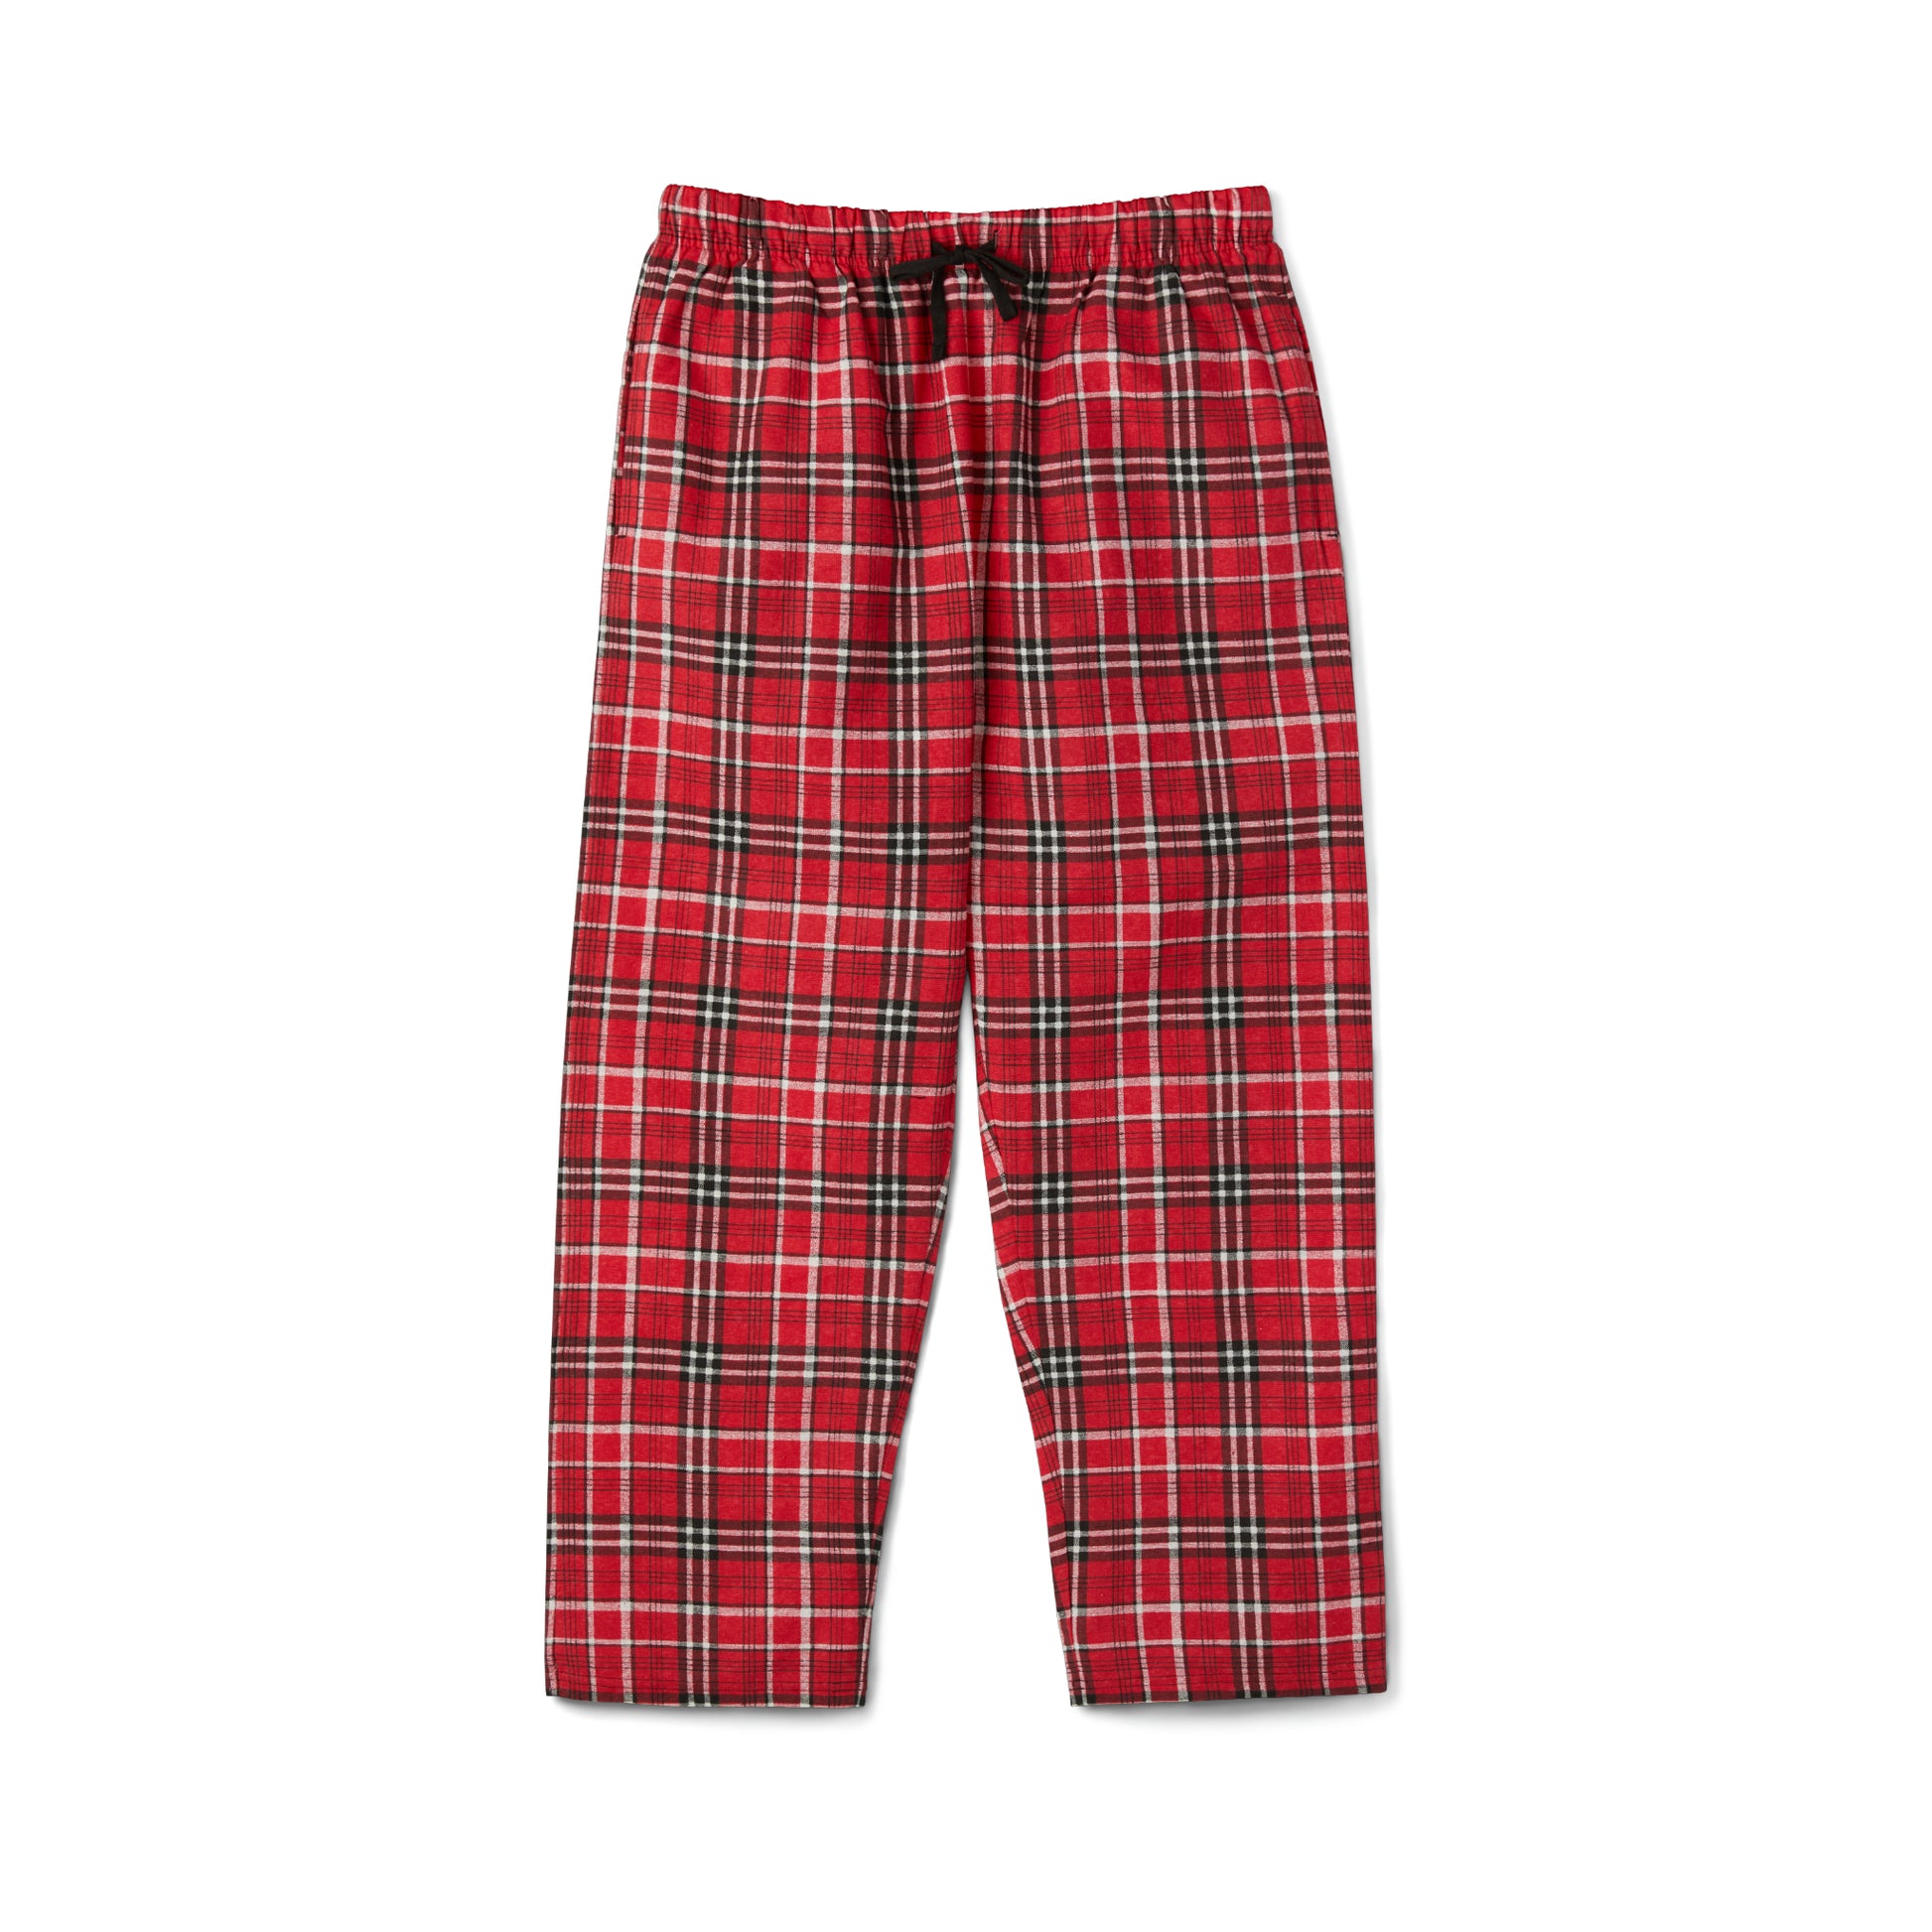 A women's matching-family pajama set by Printify featuring a Santa Claws design in red and black plaid.